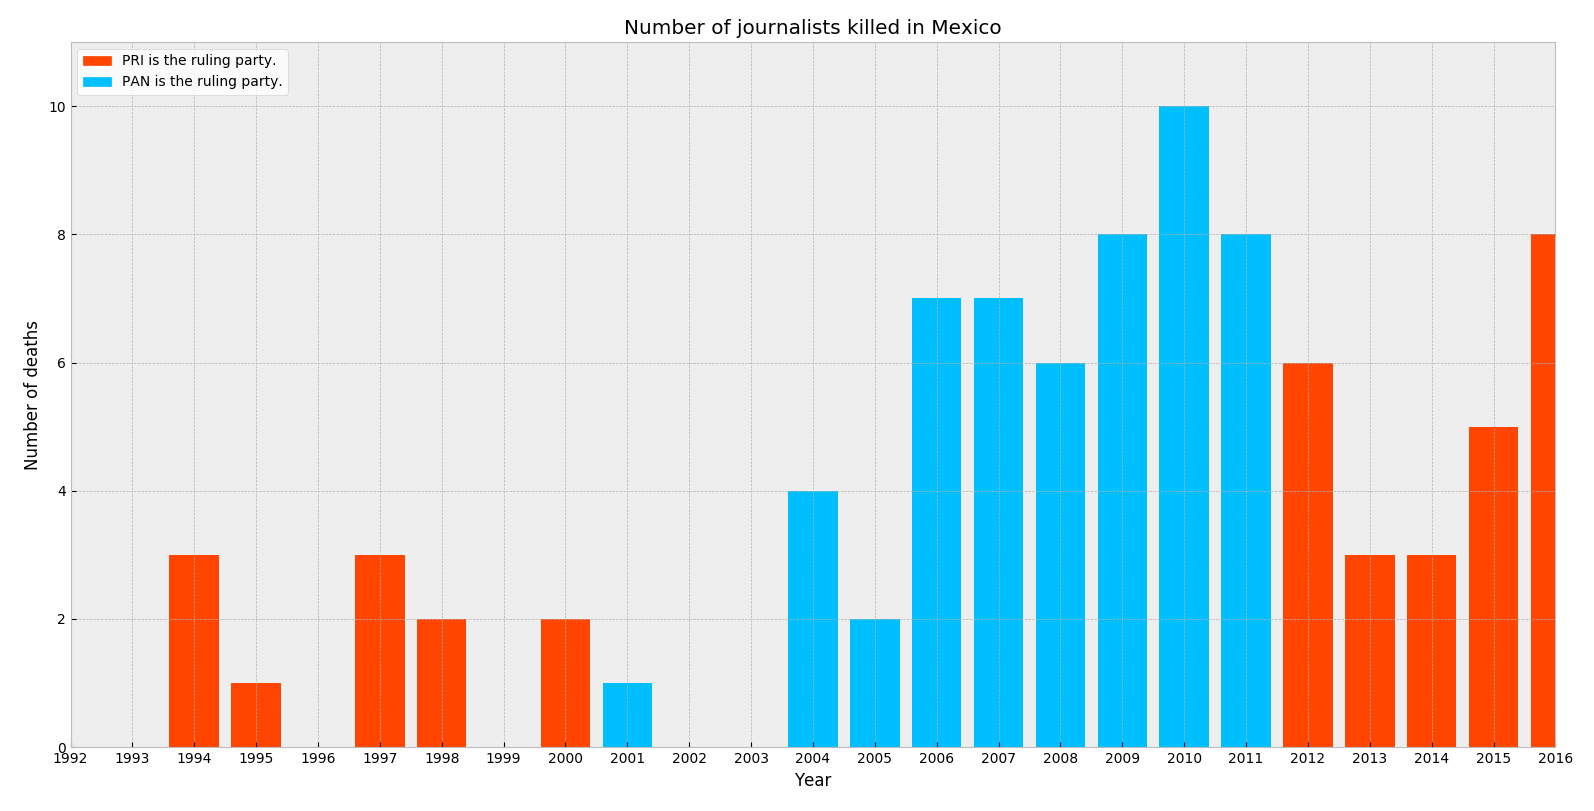 Figure 1: Number of journalists killed in Mexico.